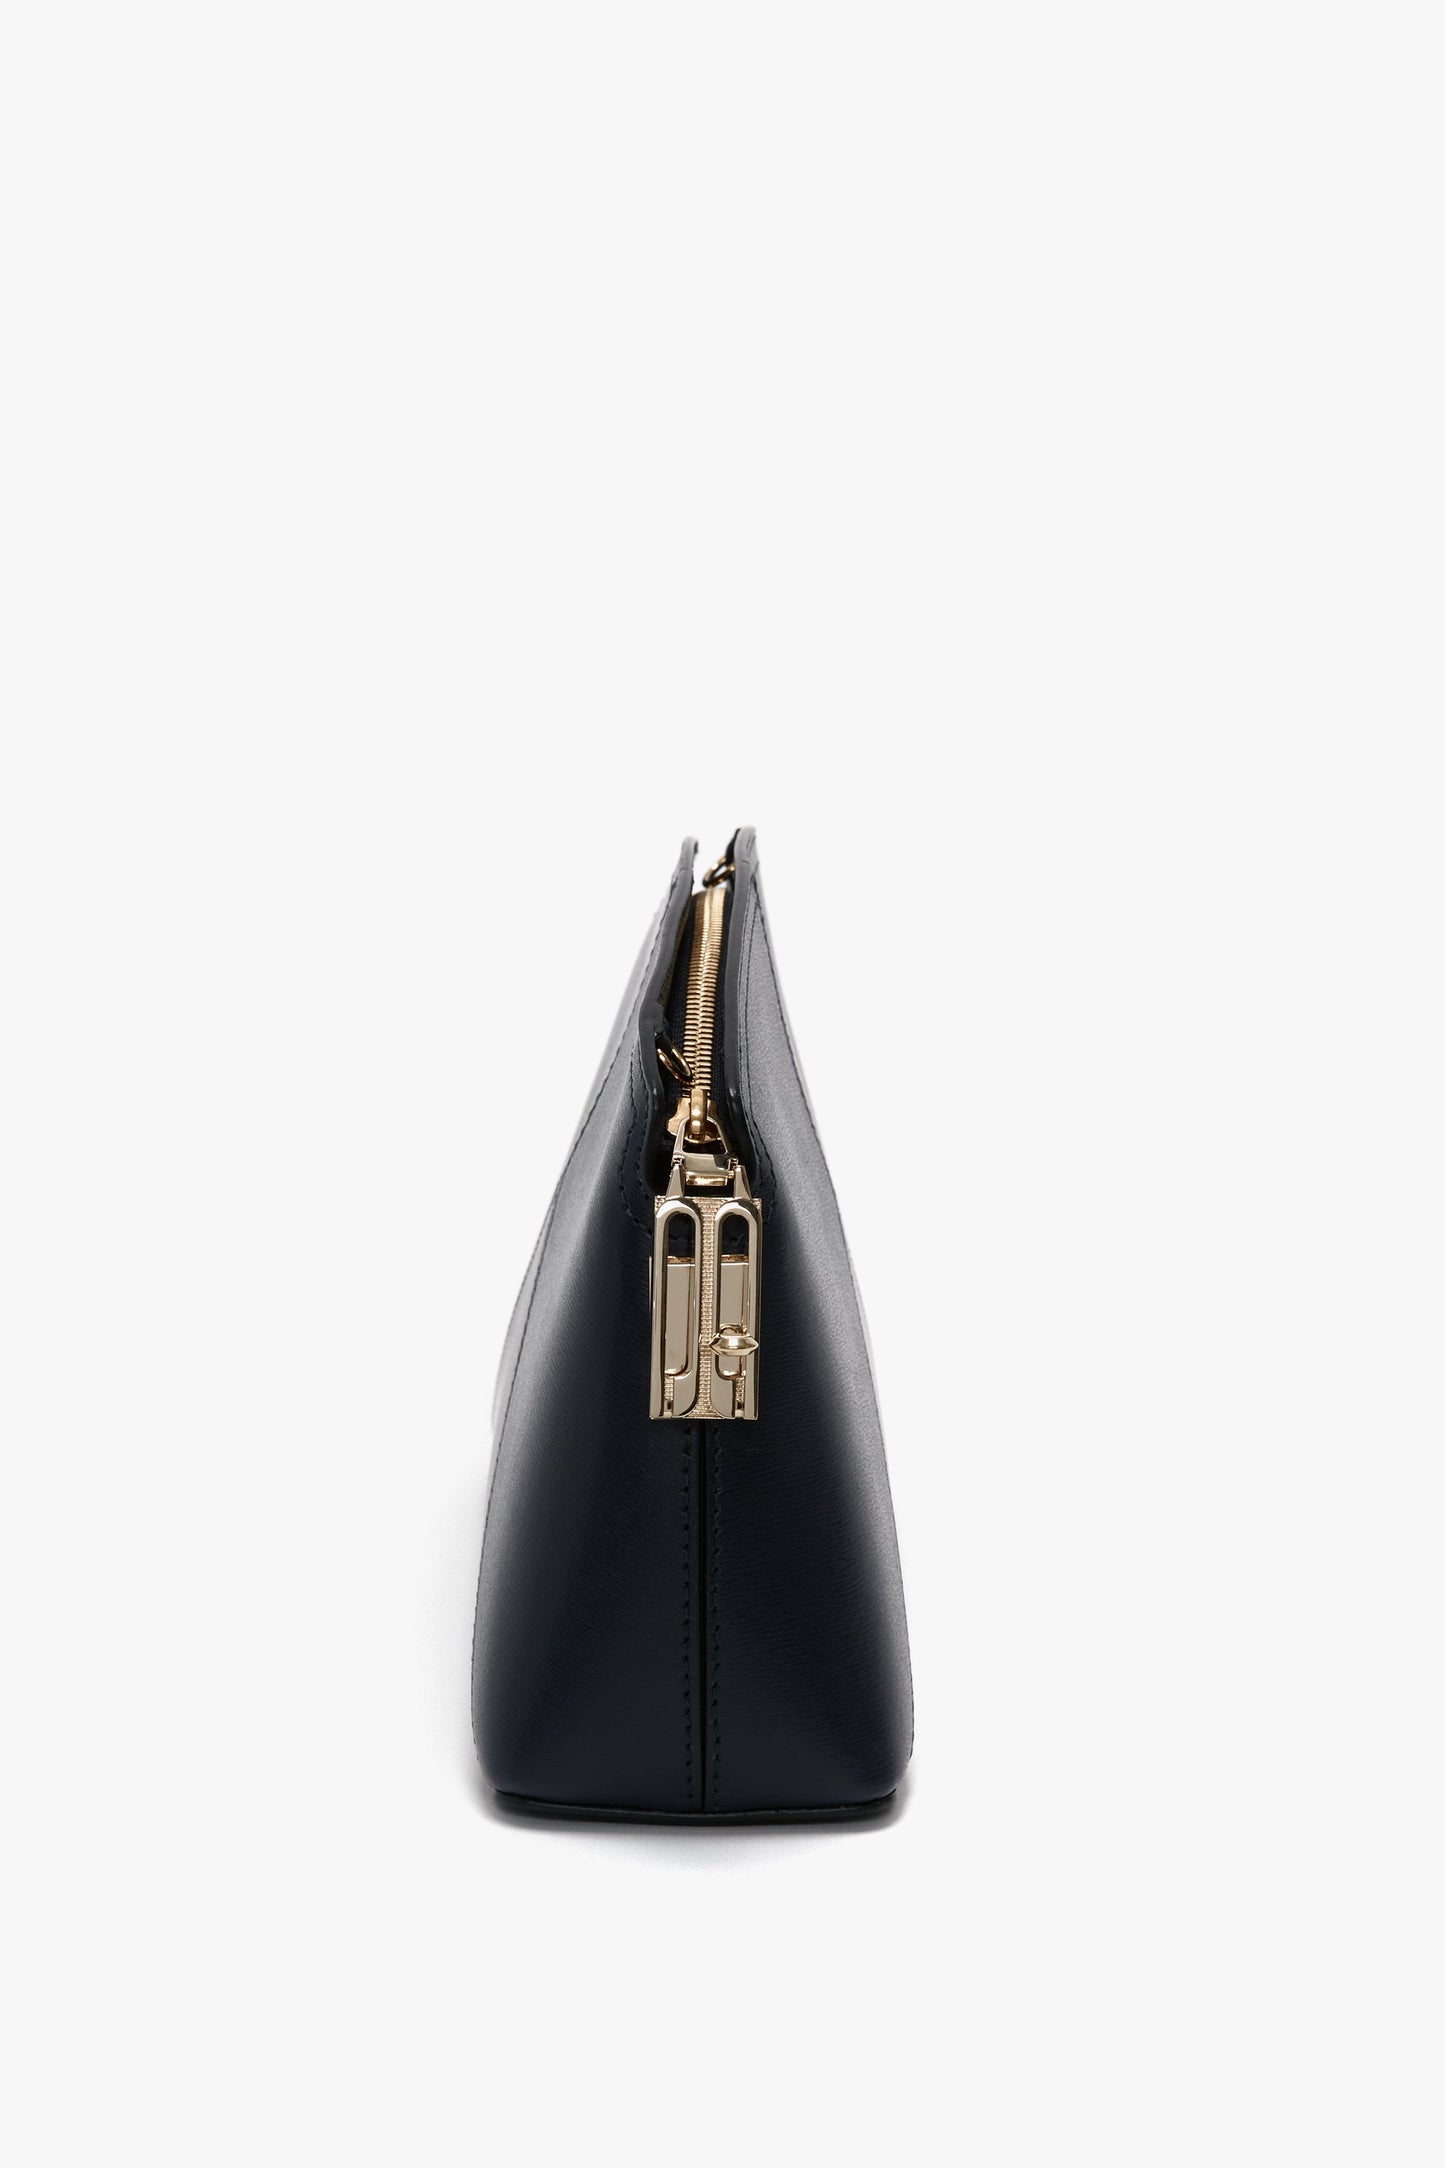 Side view of a chic Exclusive Victoria Crossbody Bag in navy leather with a gold zipper and stunning gold hardware, perfectly showcasing Victoria Beckham's elegant leather goods on a crisp white background.